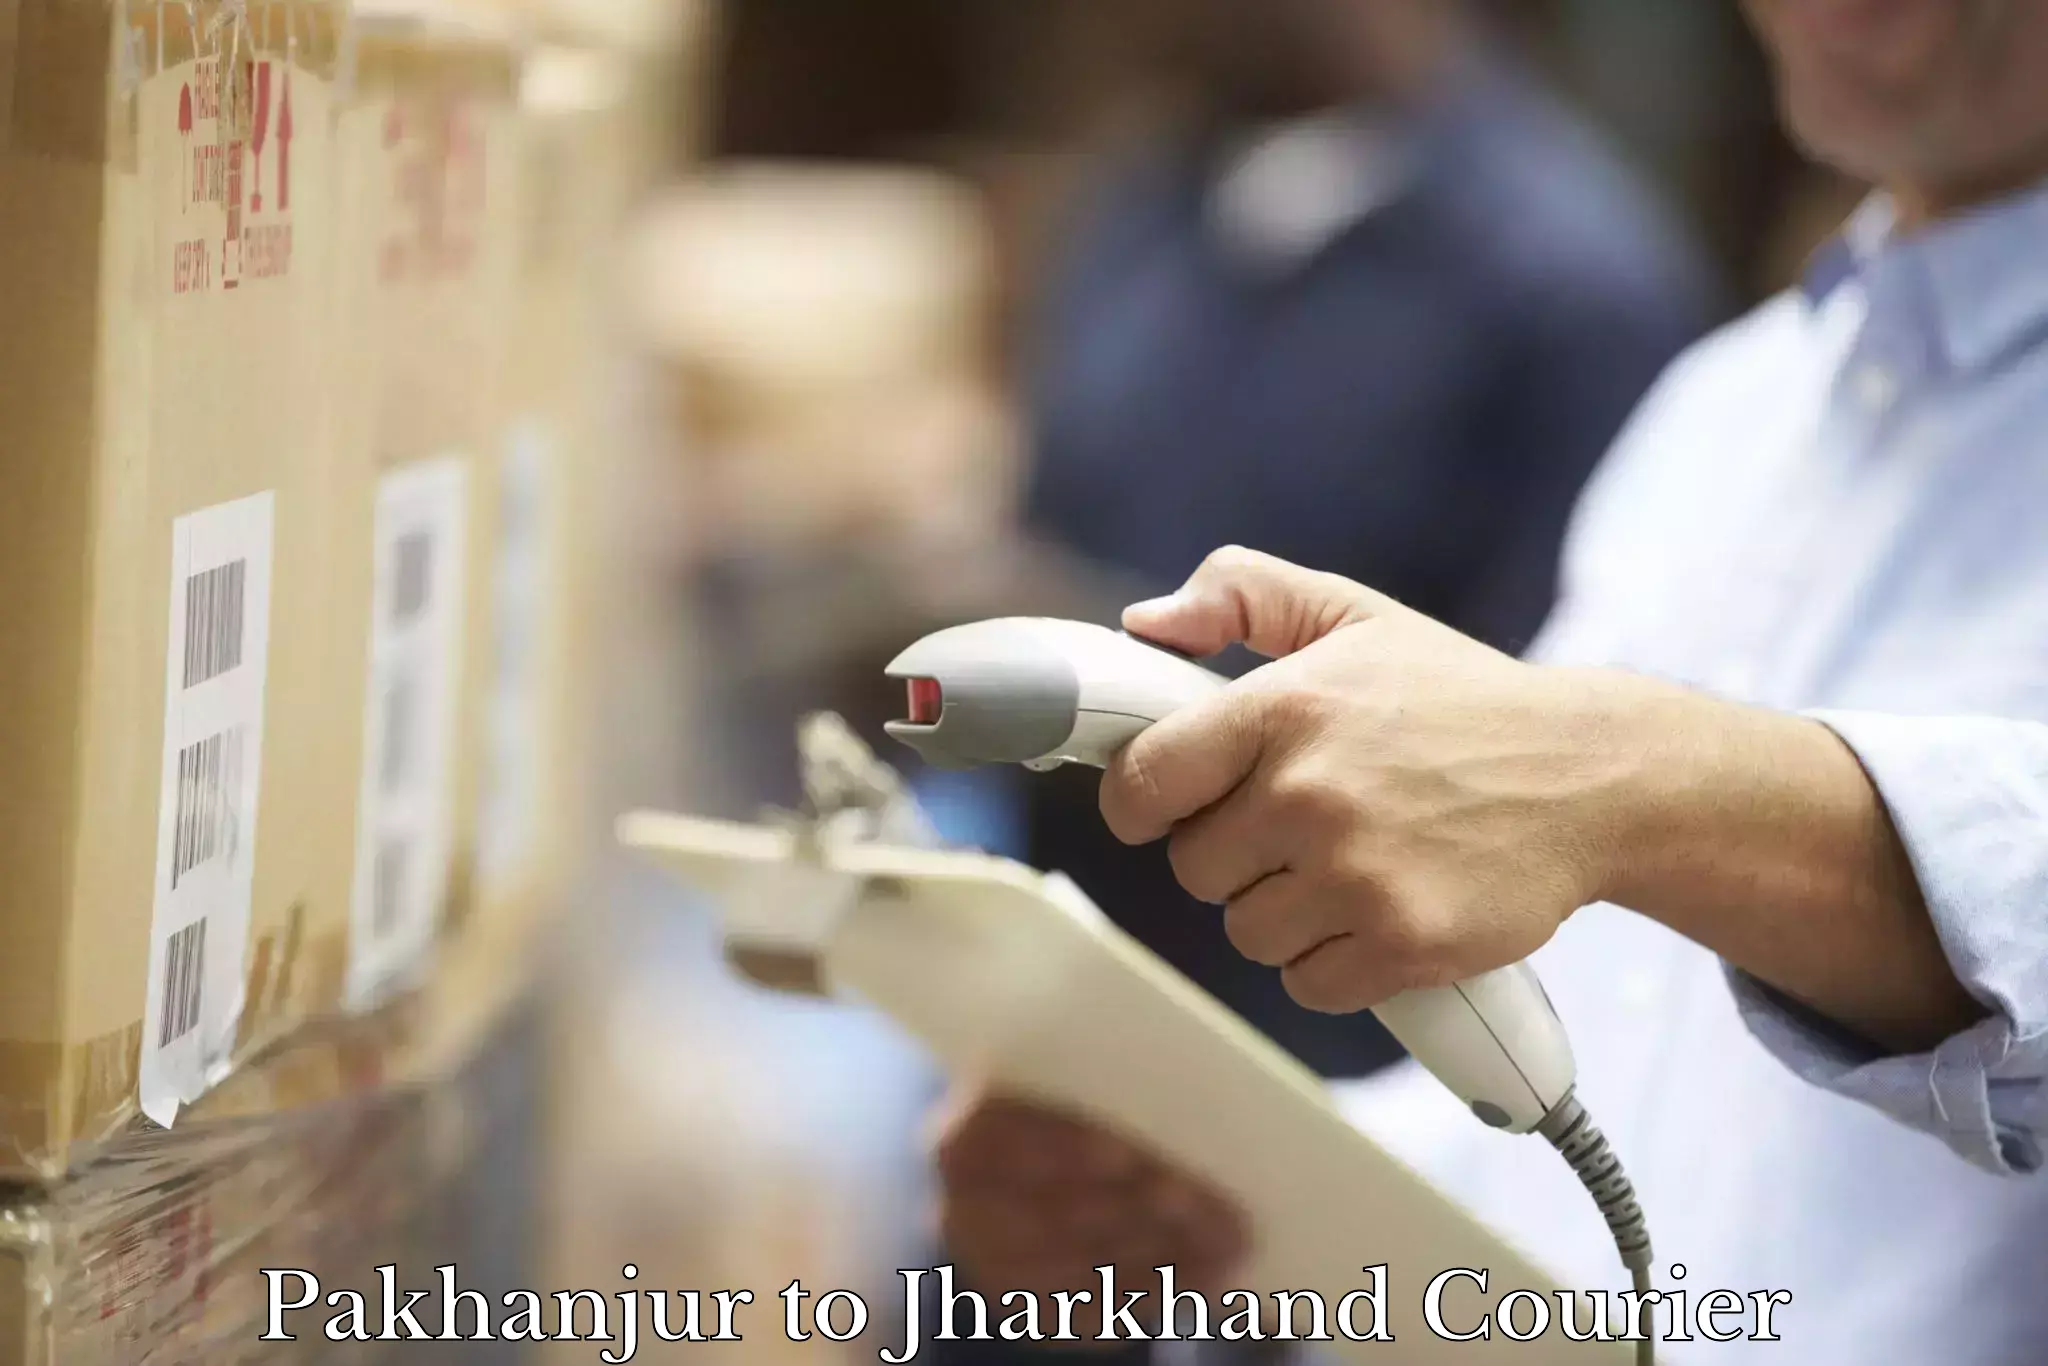 Courier service efficiency Pakhanjur to Jharkhand